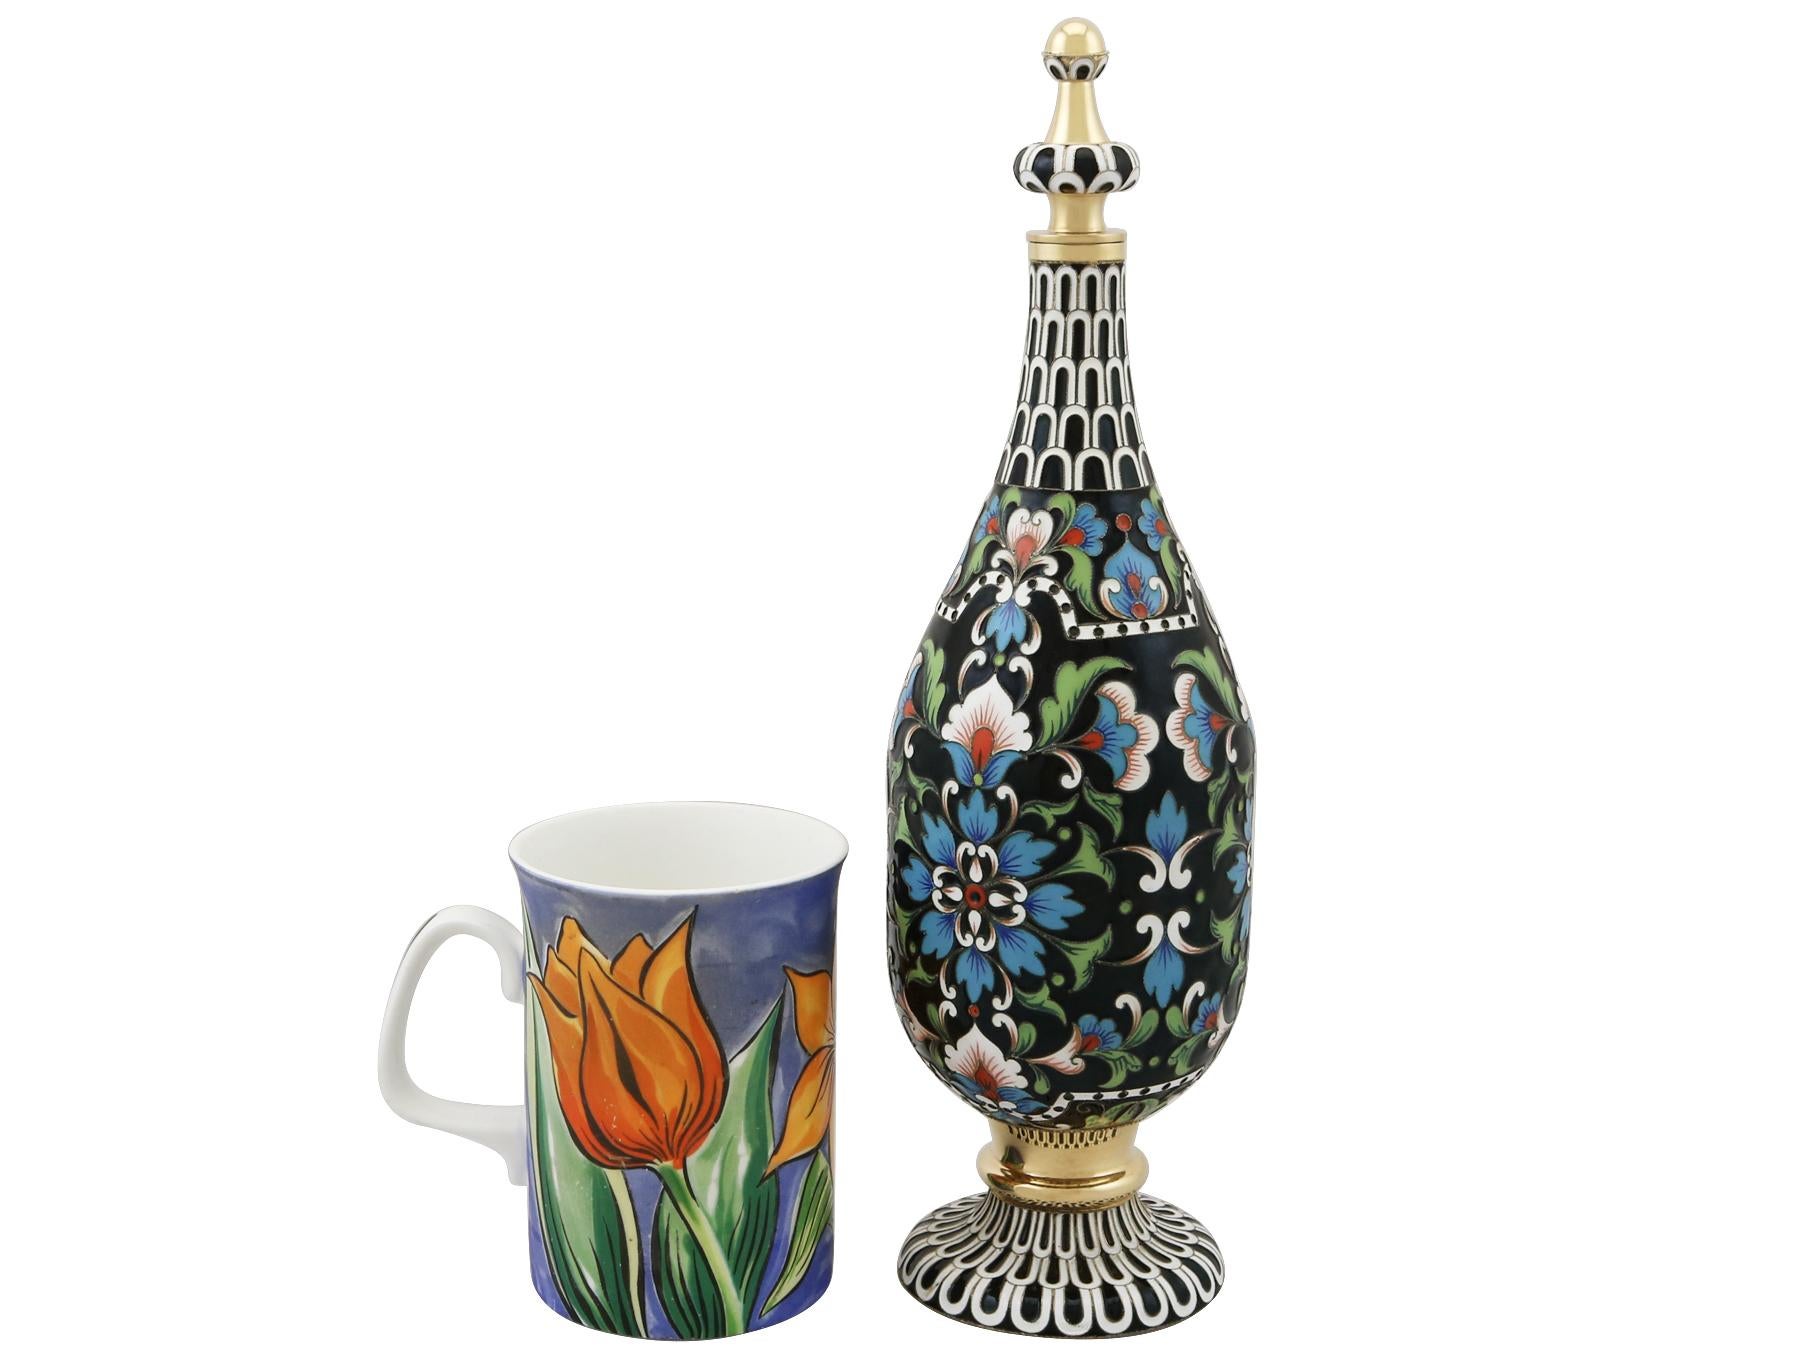 Russian Silver Gilt and Enamel Vodka Decanter and Goblet Set 4